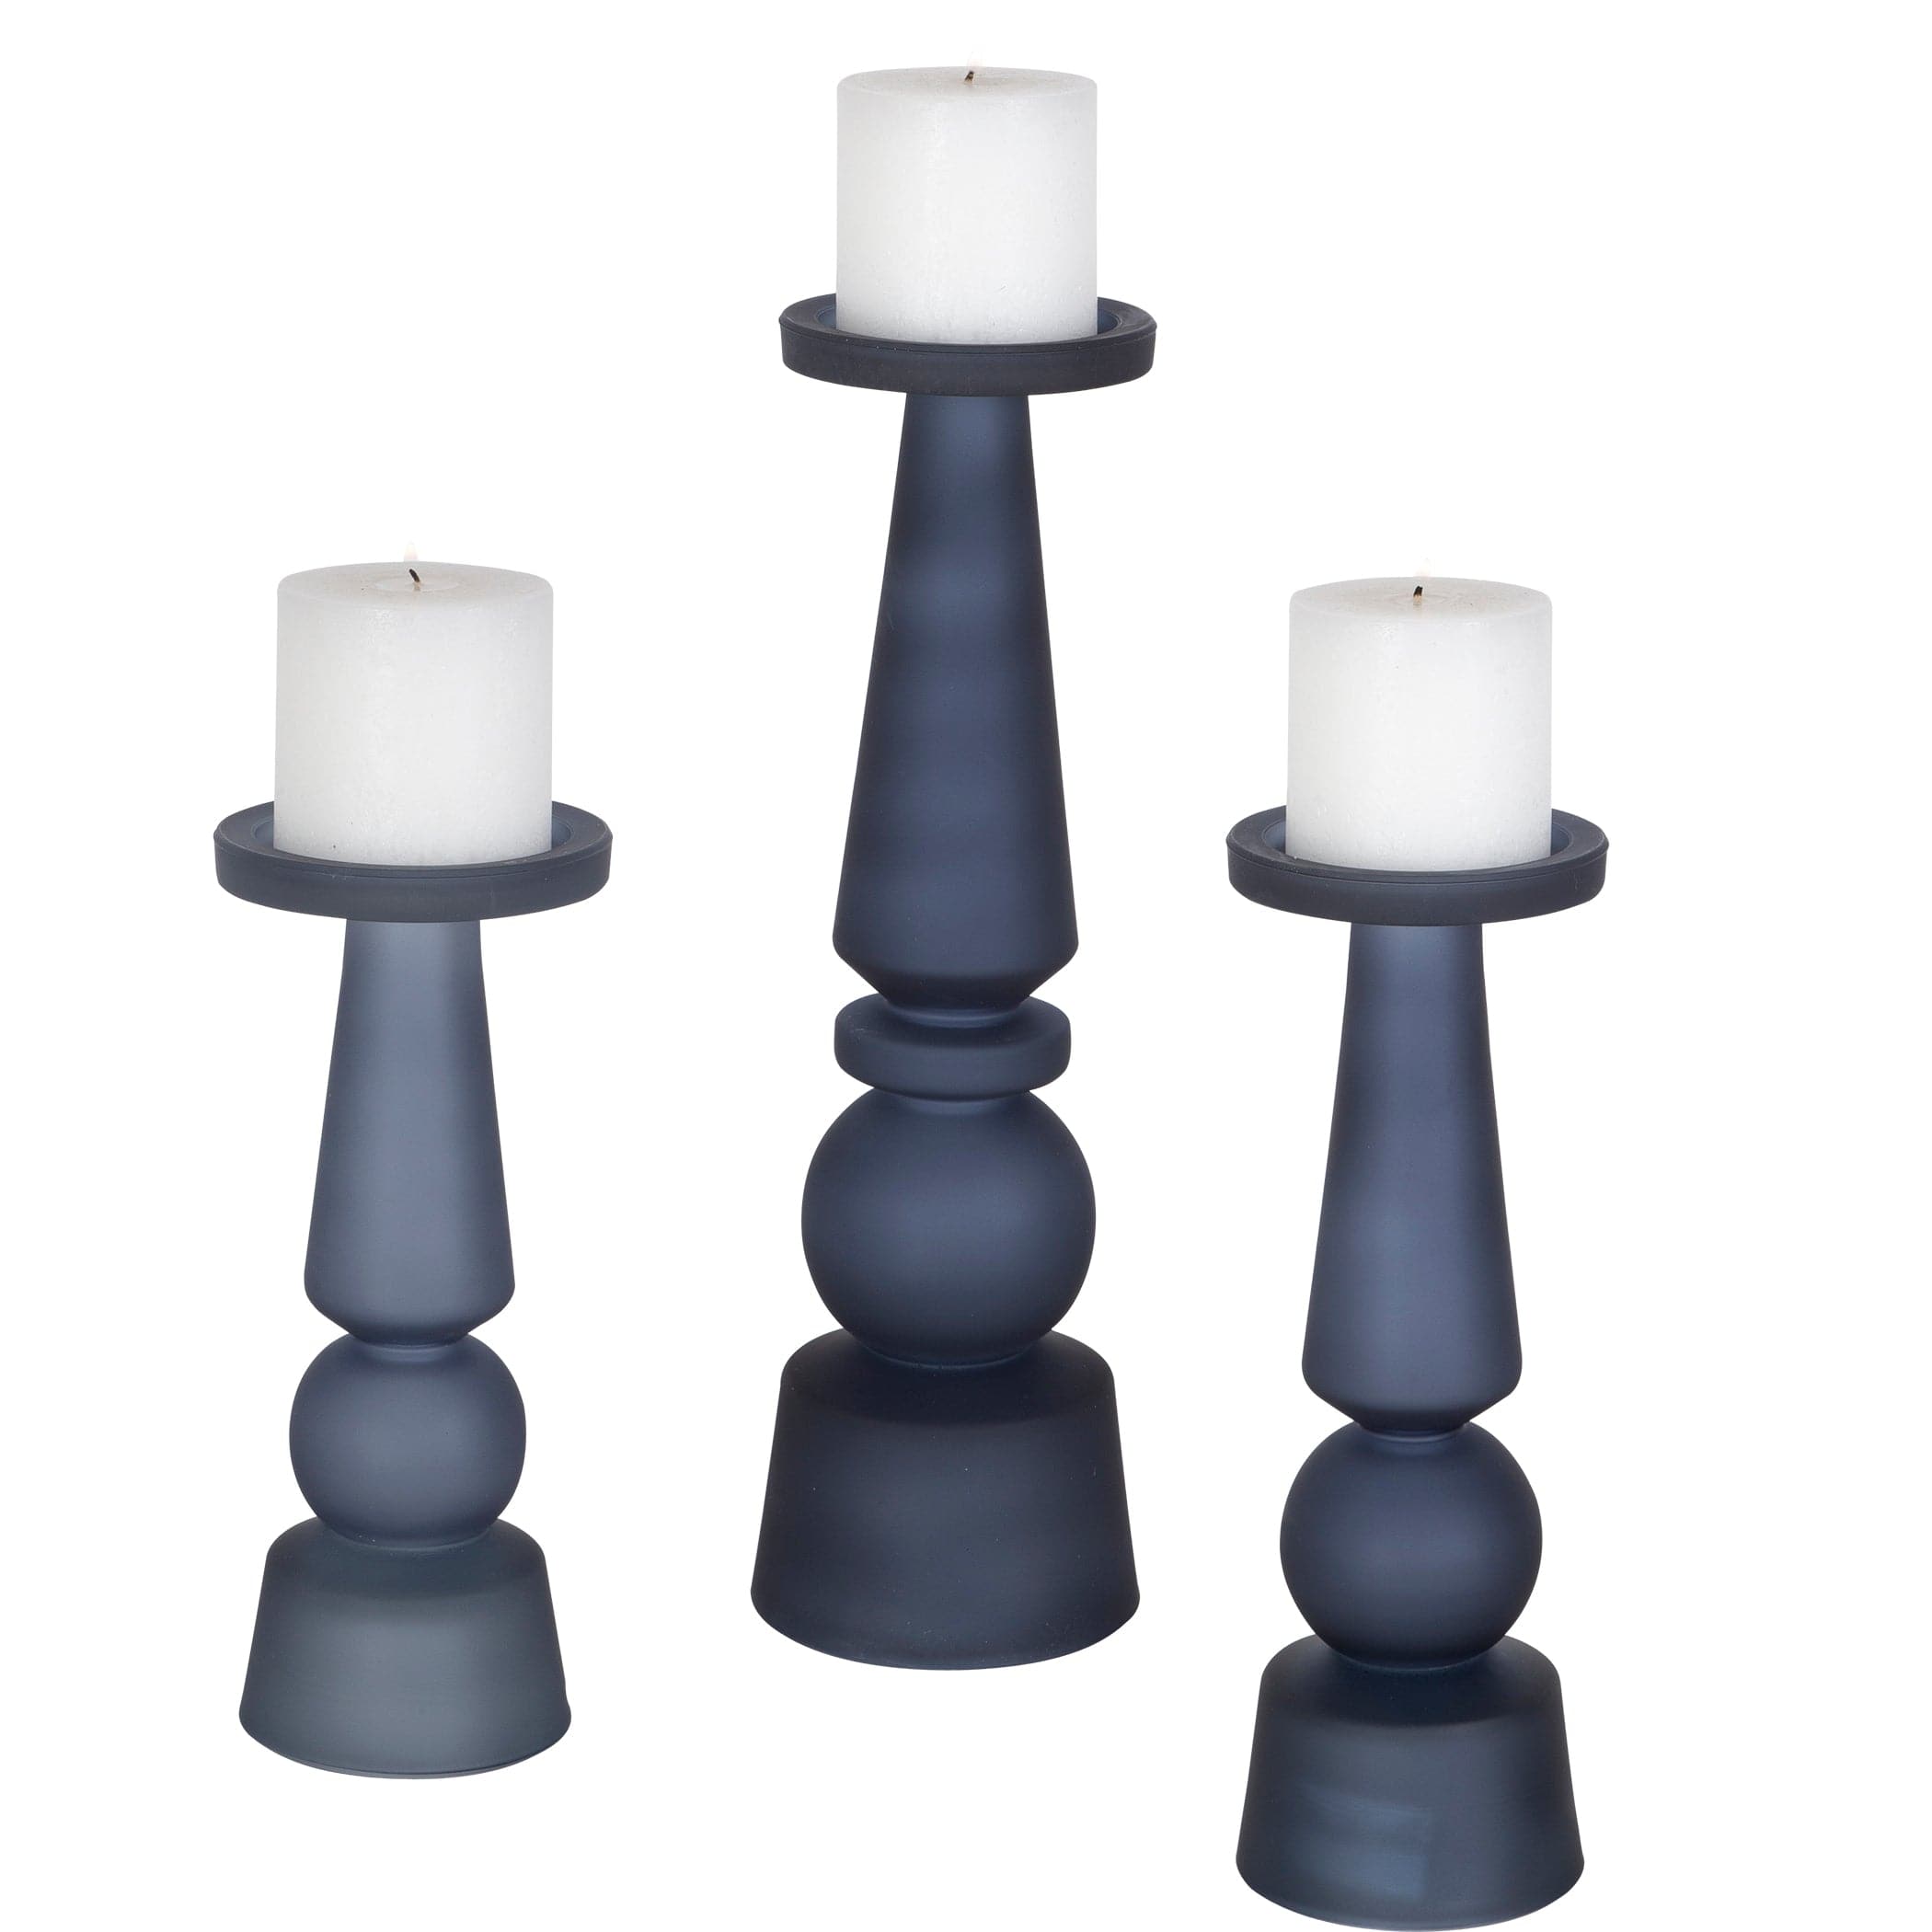 Cassiopeia Blue Glass Candleholders, S/3 Uttermost